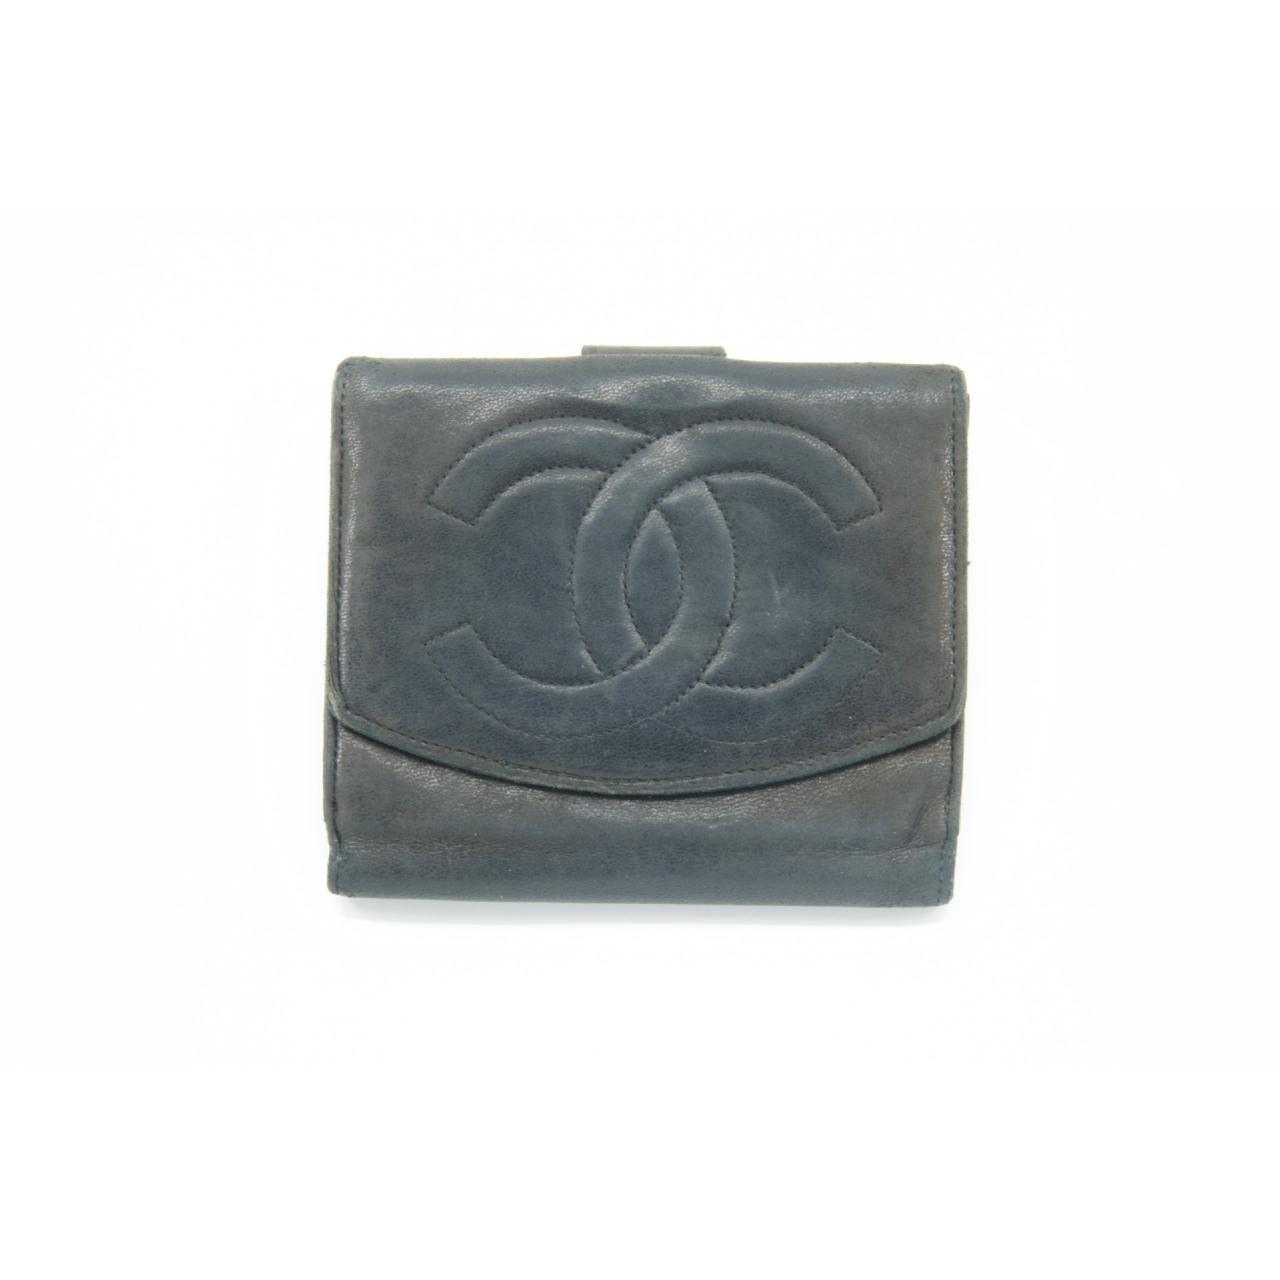 Chanel Lambskin Wallet, Color: Black, Material